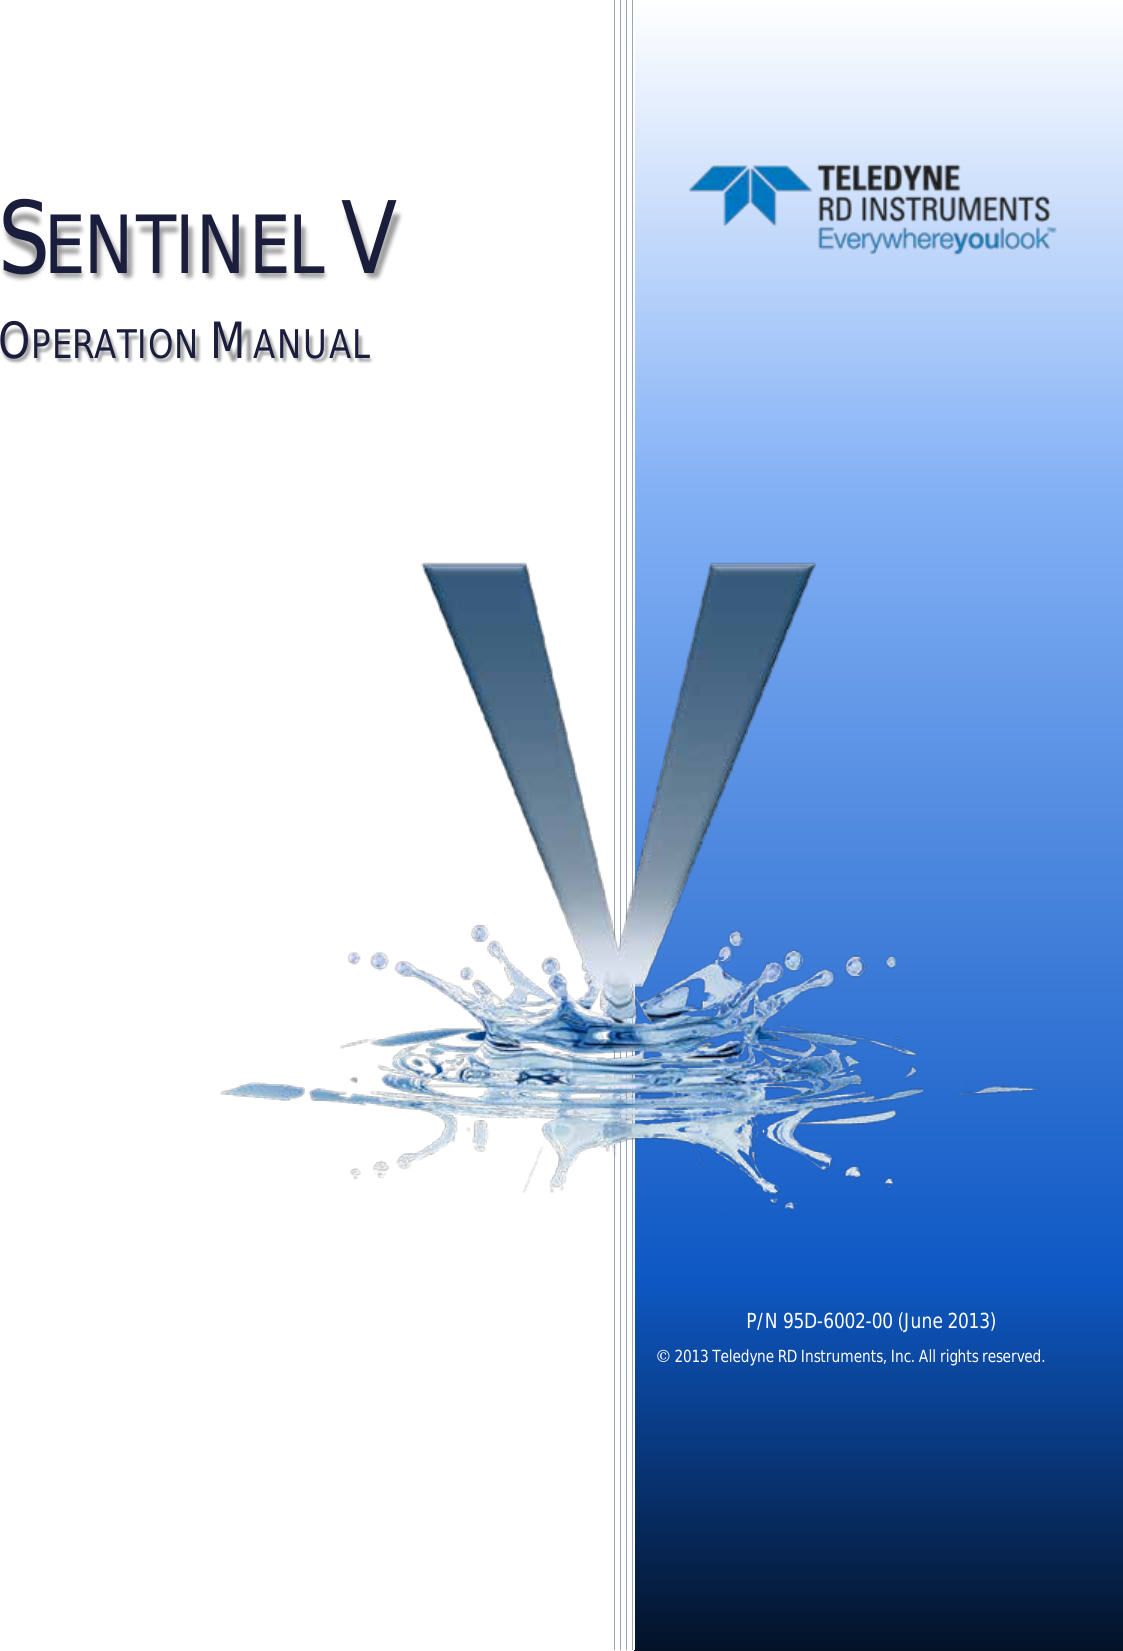  SENTINEL V OPERATION MANUAL     P/N 95D-6002-00 (June 2013) © 2013 Teledyne RD Instruments, Inc. All rights reserved.  